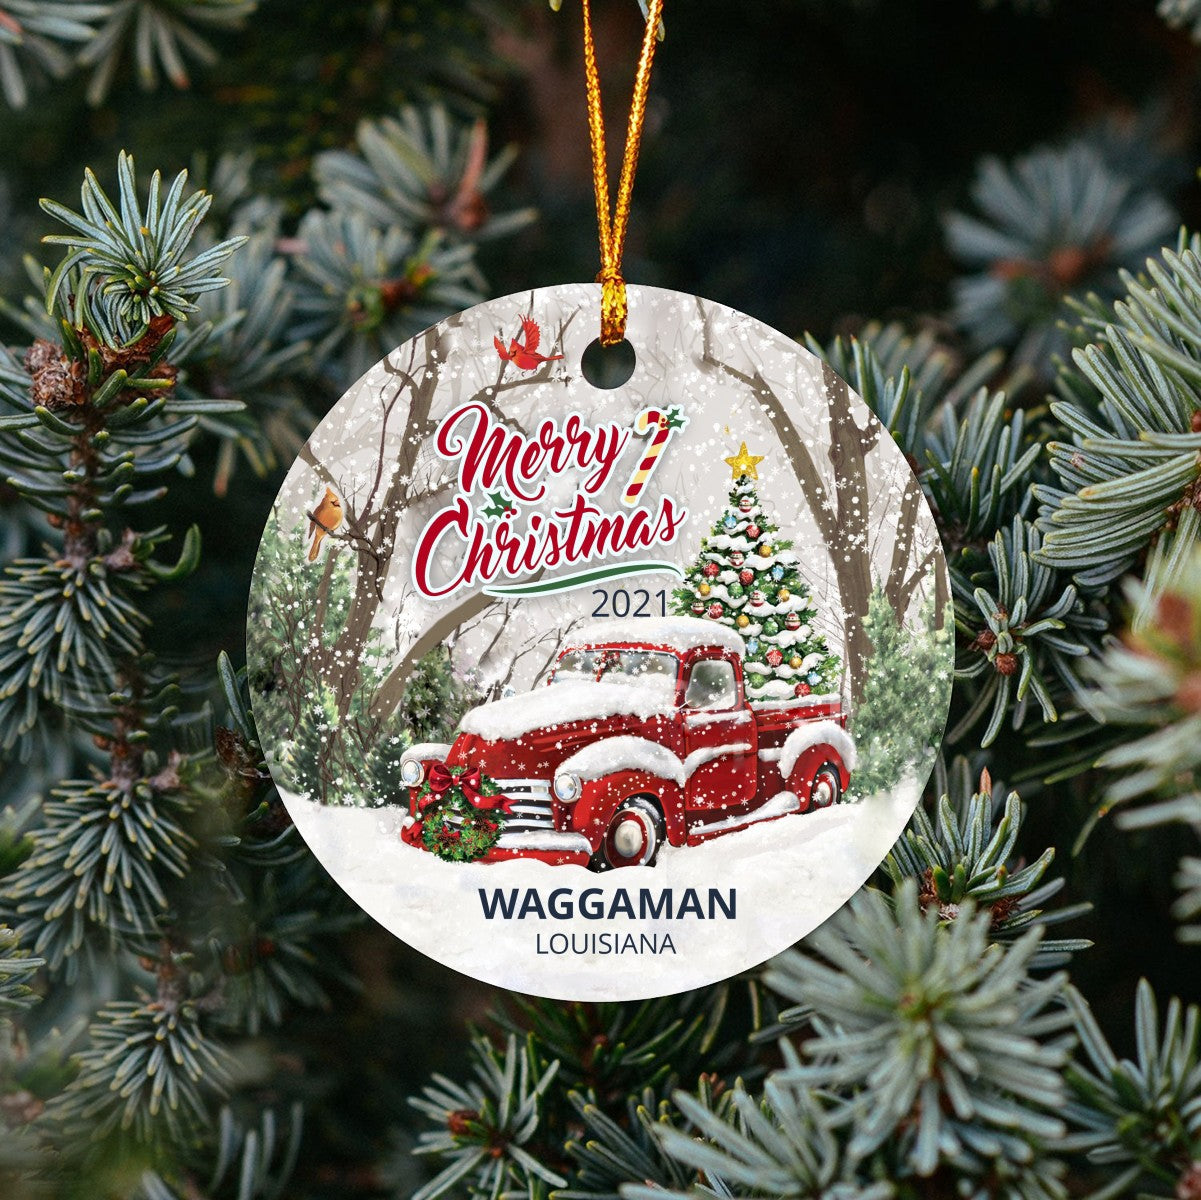 Christmas Tree Ornaments Waggaman - Ornament With Name City, State Waggaman Louisiana LA Ornament - Red Truck Xmas Ornaments 3'' Plastic Gift For Family, Friend And Housewarming